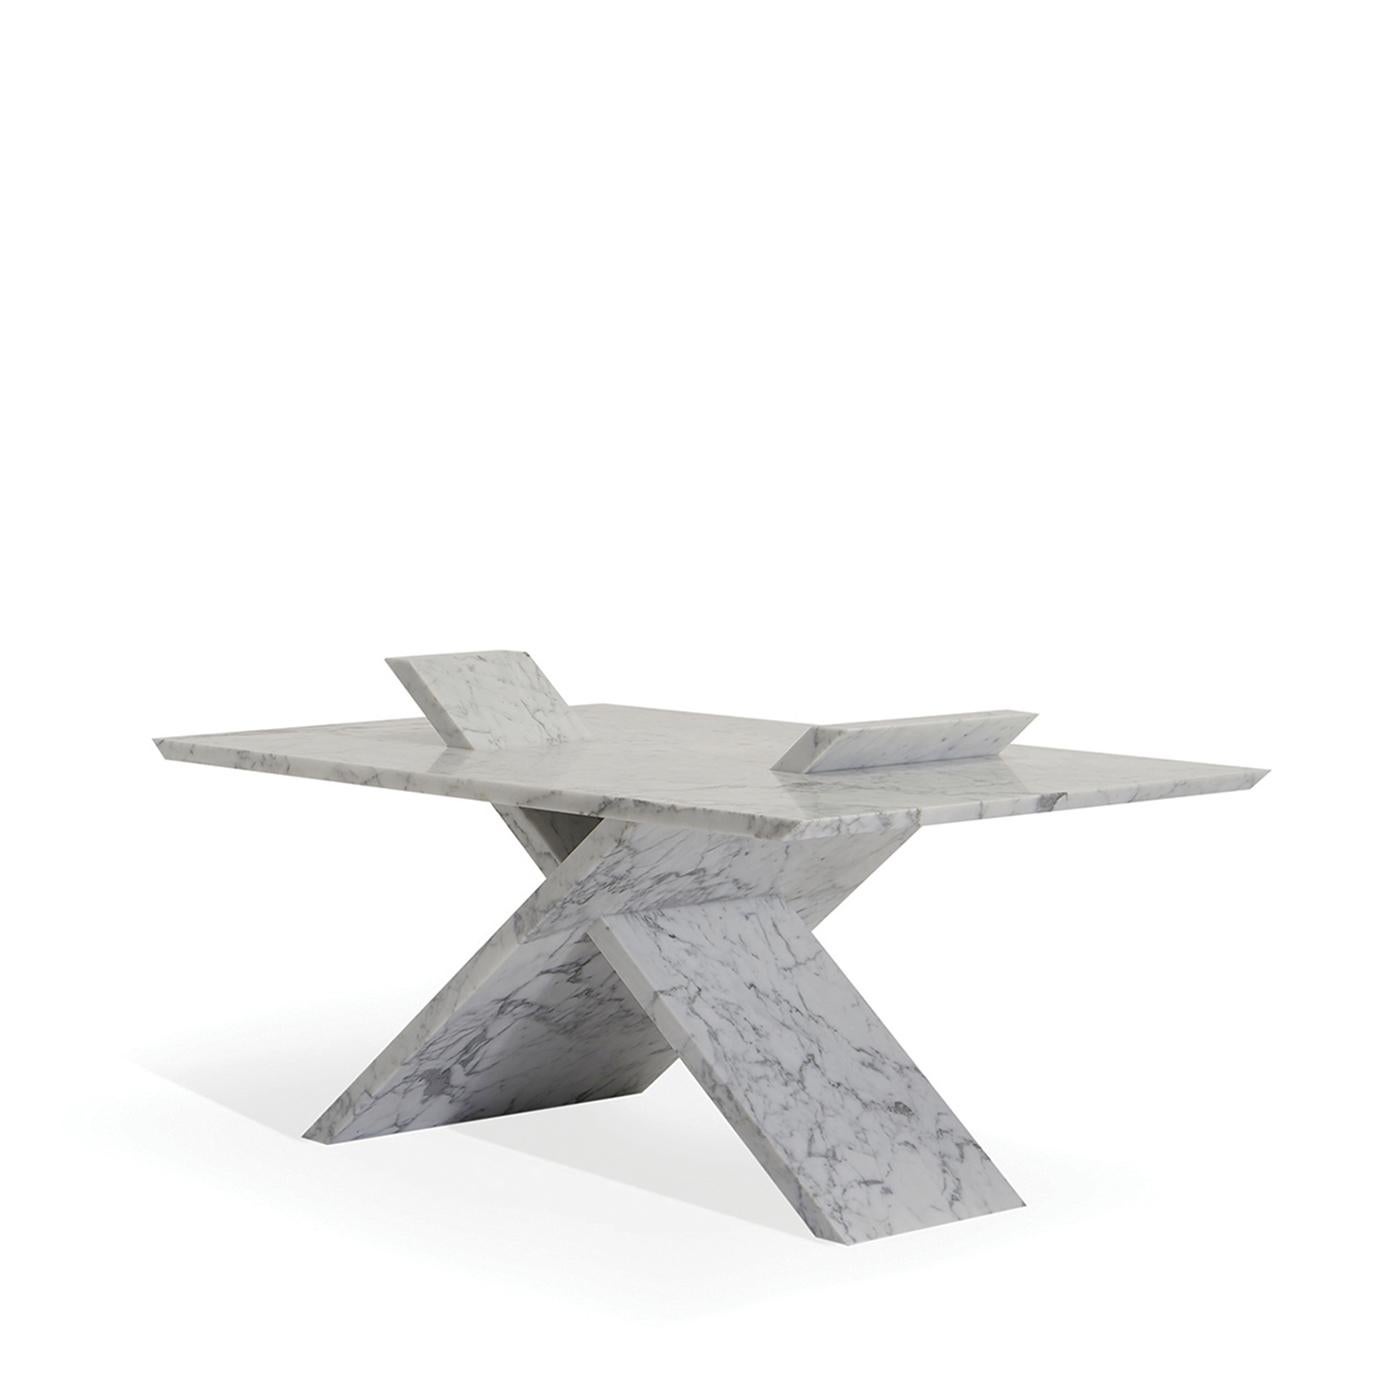 Three pieces of marble are pieces together in a unique way to create an all-new conception of a dining table. In fine Carrara marble, the table sits on an X shaped base that comes through the table's surface to dialogue with your meals. The table is